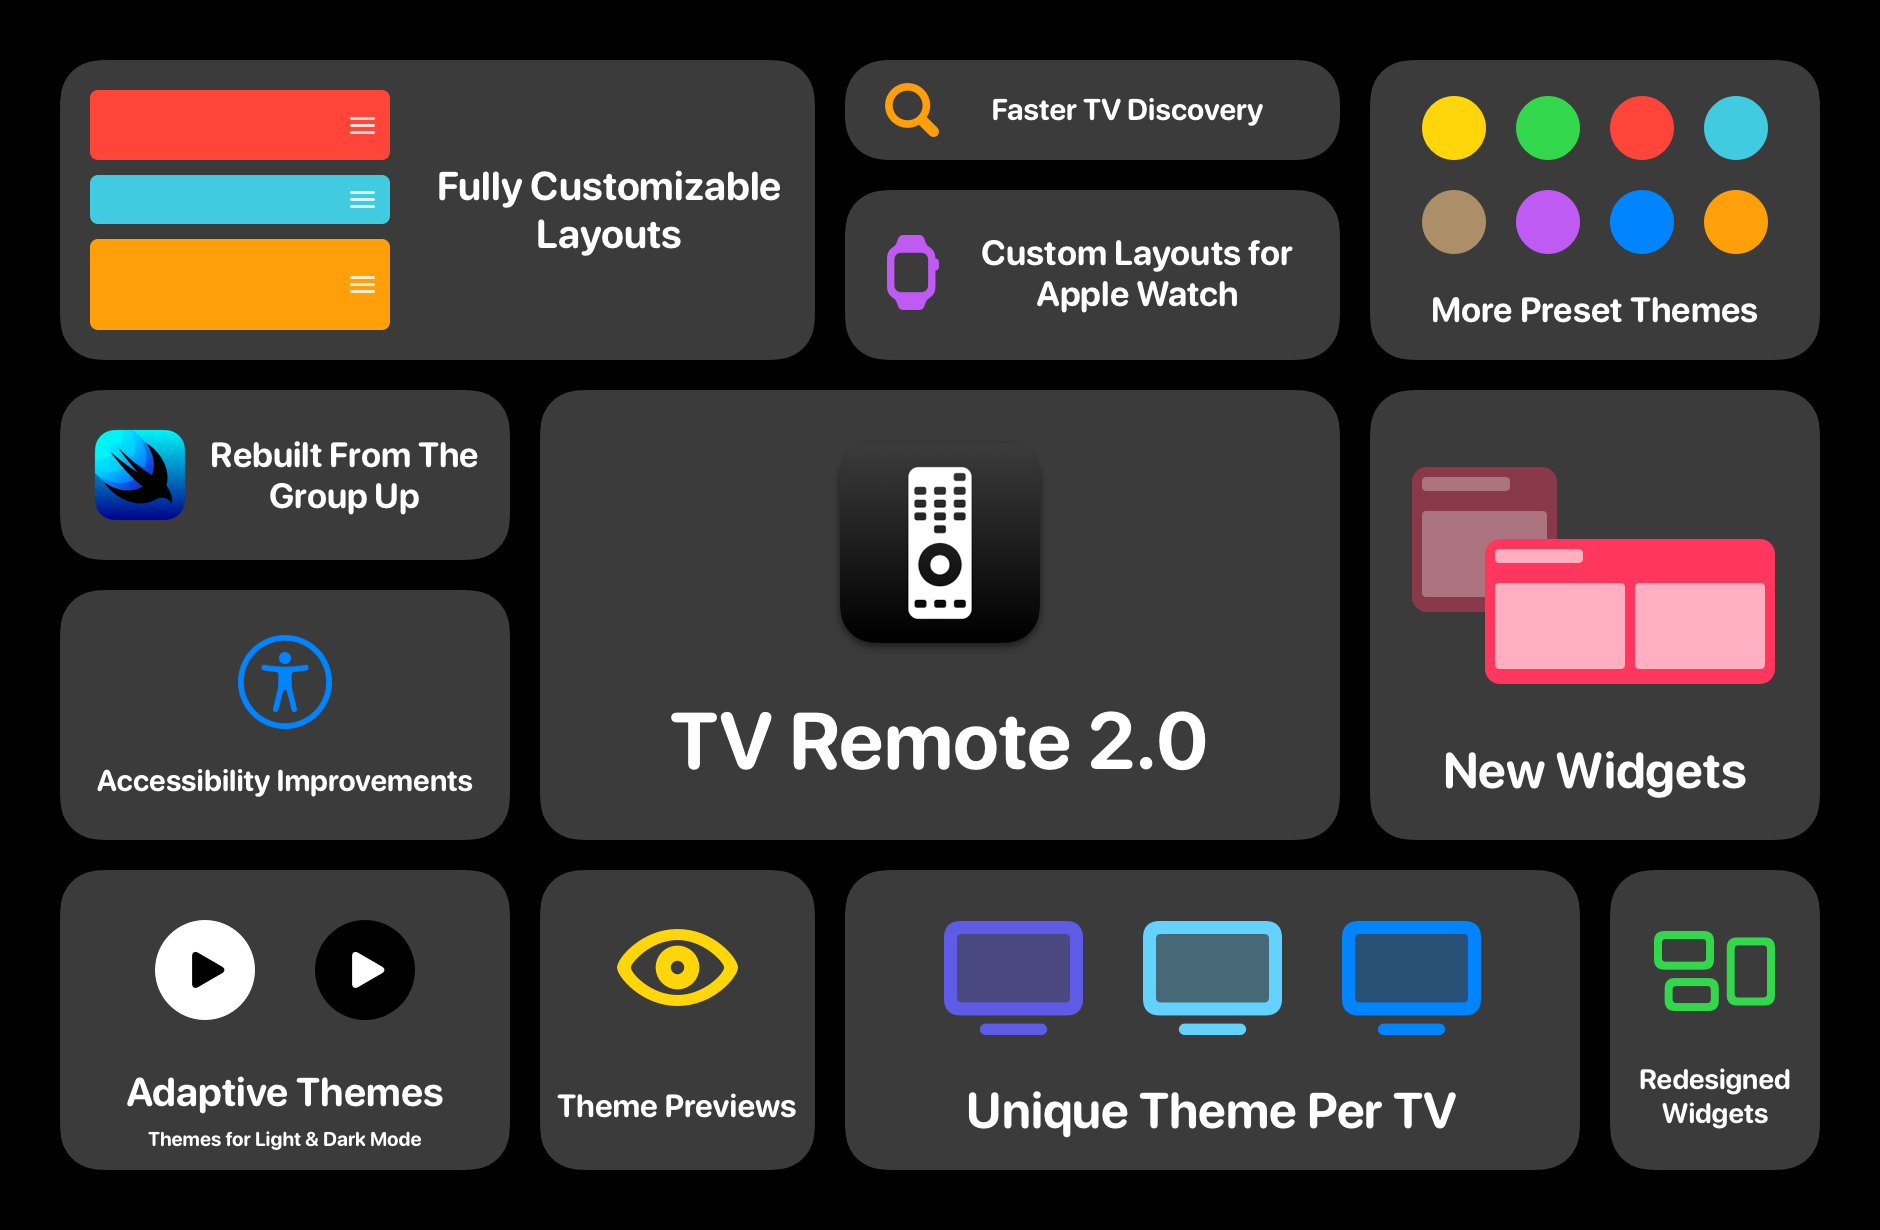 Control Your Television from Your iPhone, iPad and Apple Watch With TV Remote